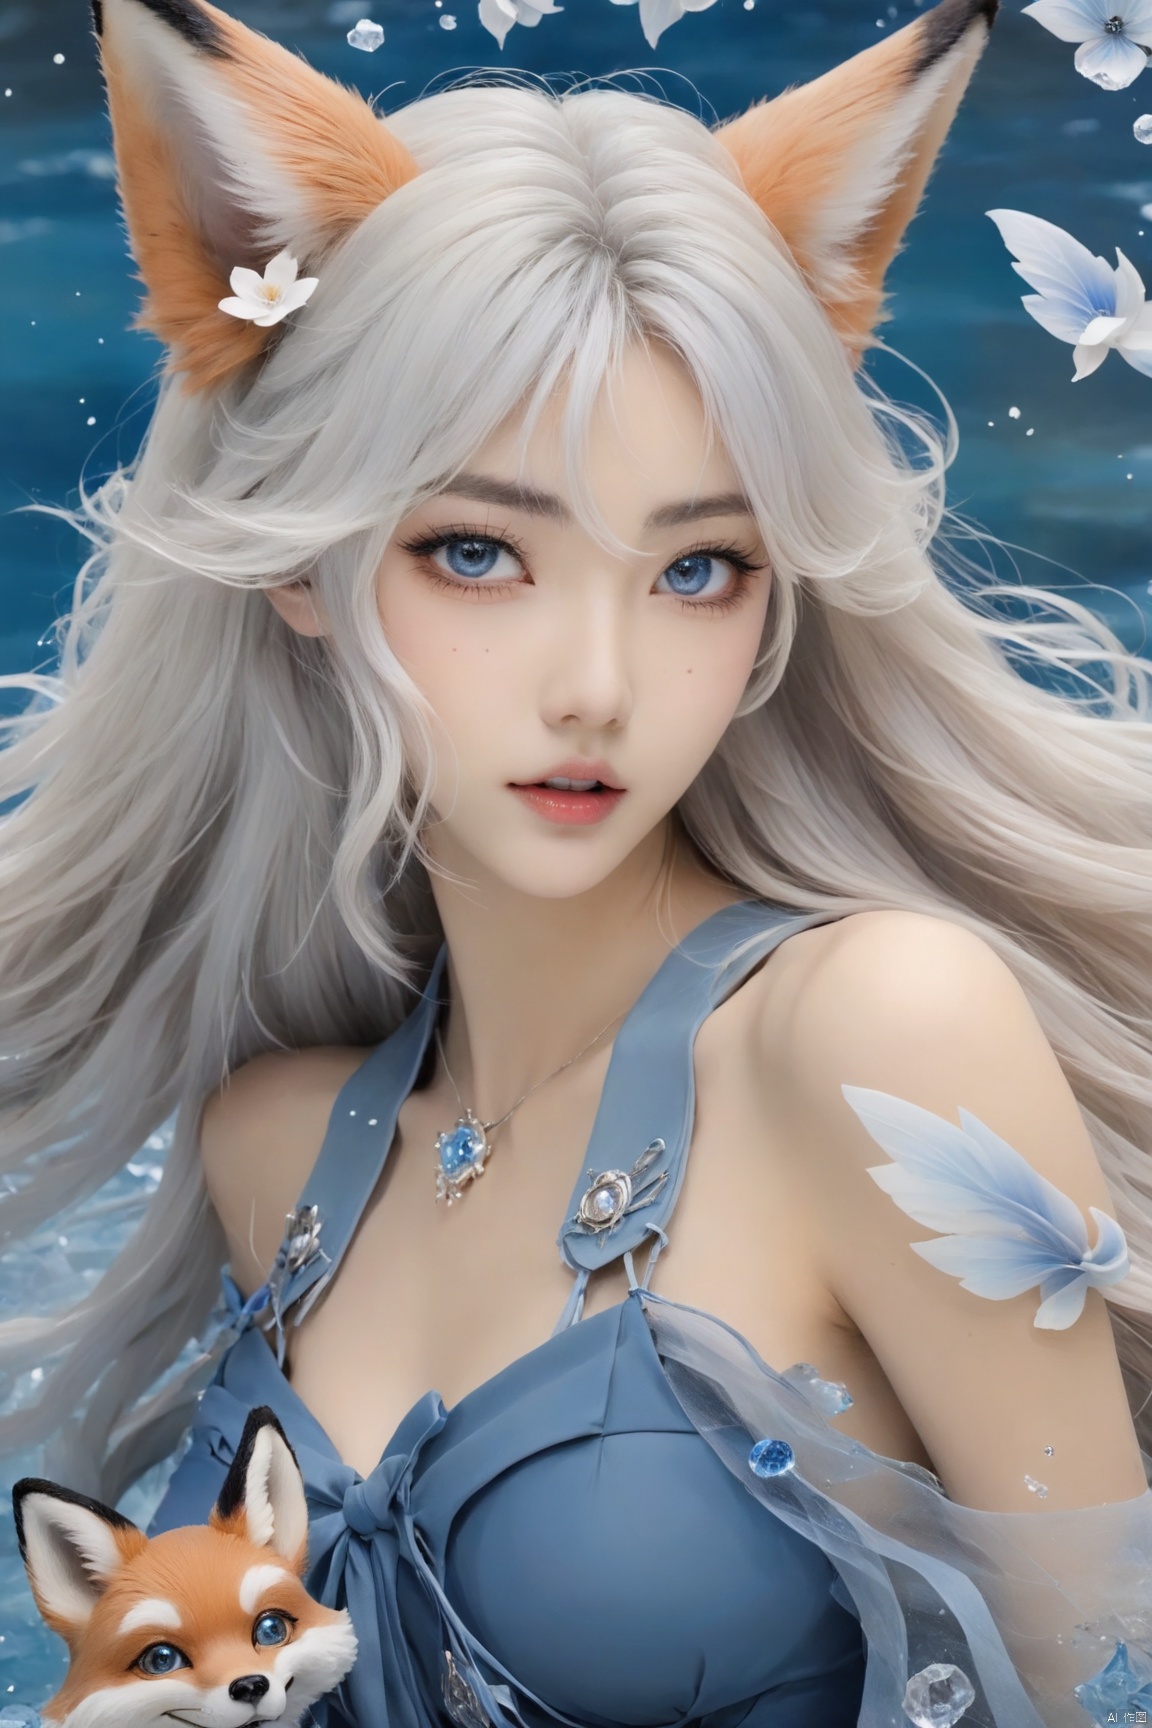  masterpiece,best quality,official art,extremelydetailed cg 8k wallpaper,(flying petals)(detailed ice),crystalstexture skin,coldexpression,((fox ears)),white hair,longhair,messy hair,blue eye,looking at viewer,extremely delicate andbeautiful,water,((beautydetailed eye)),highlydetailed,cinematiclighting,((beautiful face),fine water surface, (originalfigure painting), ultra-detailed, incrediblydetailed, (an extremelydelicate and beautiful),beautiful detailed eyes,GUOFENG, HUBG_Beauty_Girl, HUBG_Mecha_Armor, MEINV